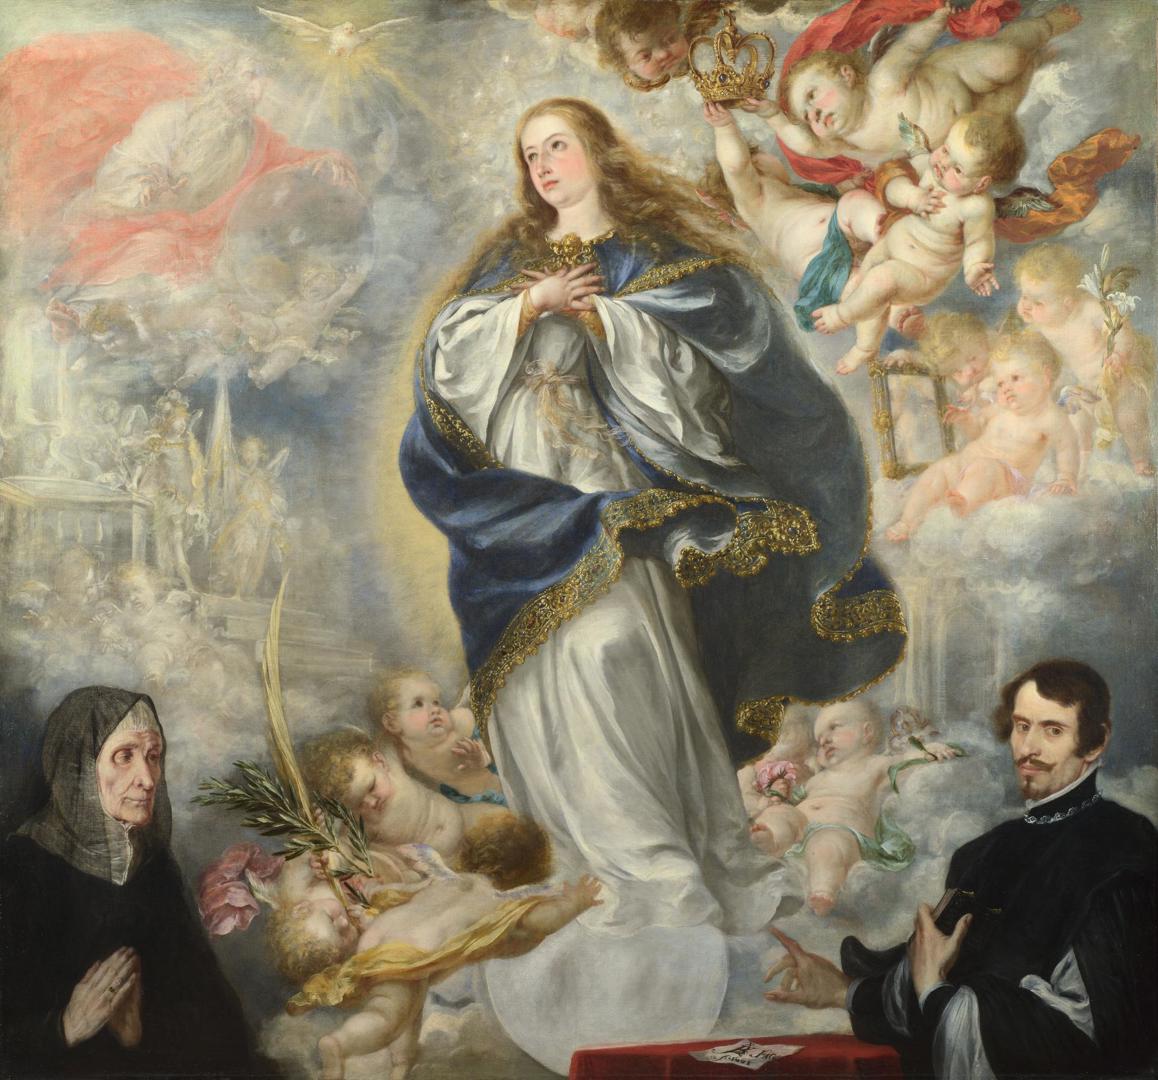 The Immaculate Conception with Two Donors by Juan de Valdes Leal